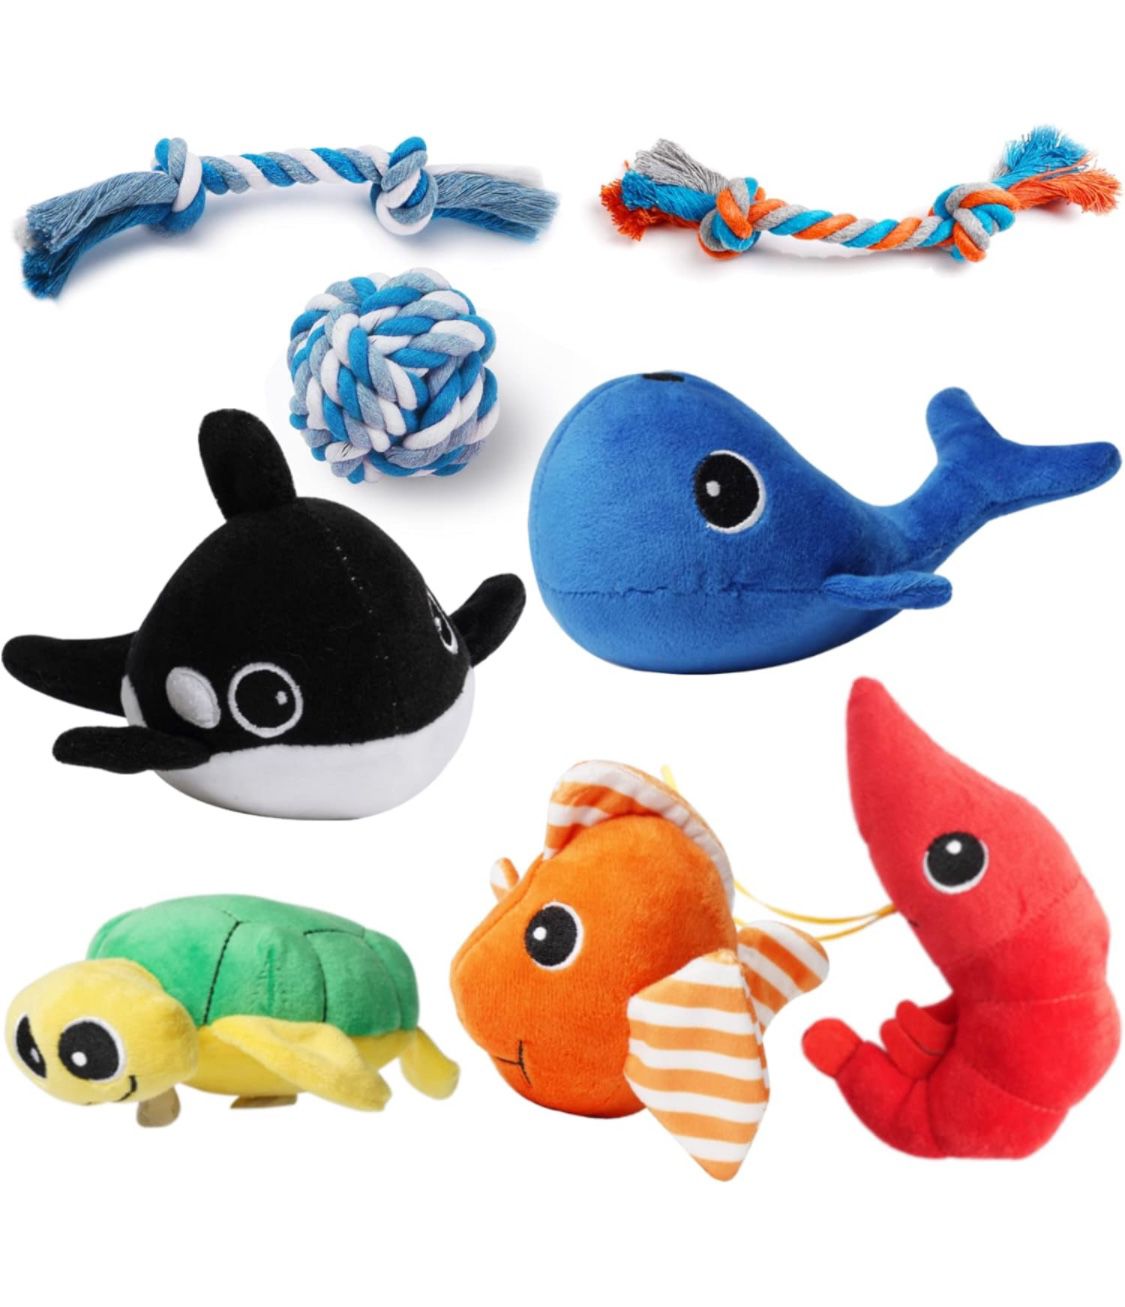 New! Puppy Toys Small Dogs, Durable Puppy Toys for Teething Small Dogs, Cute Dog Toys for Small Dogs, Stuffed Plush Squeaky Dog Toys and Ocean Small D